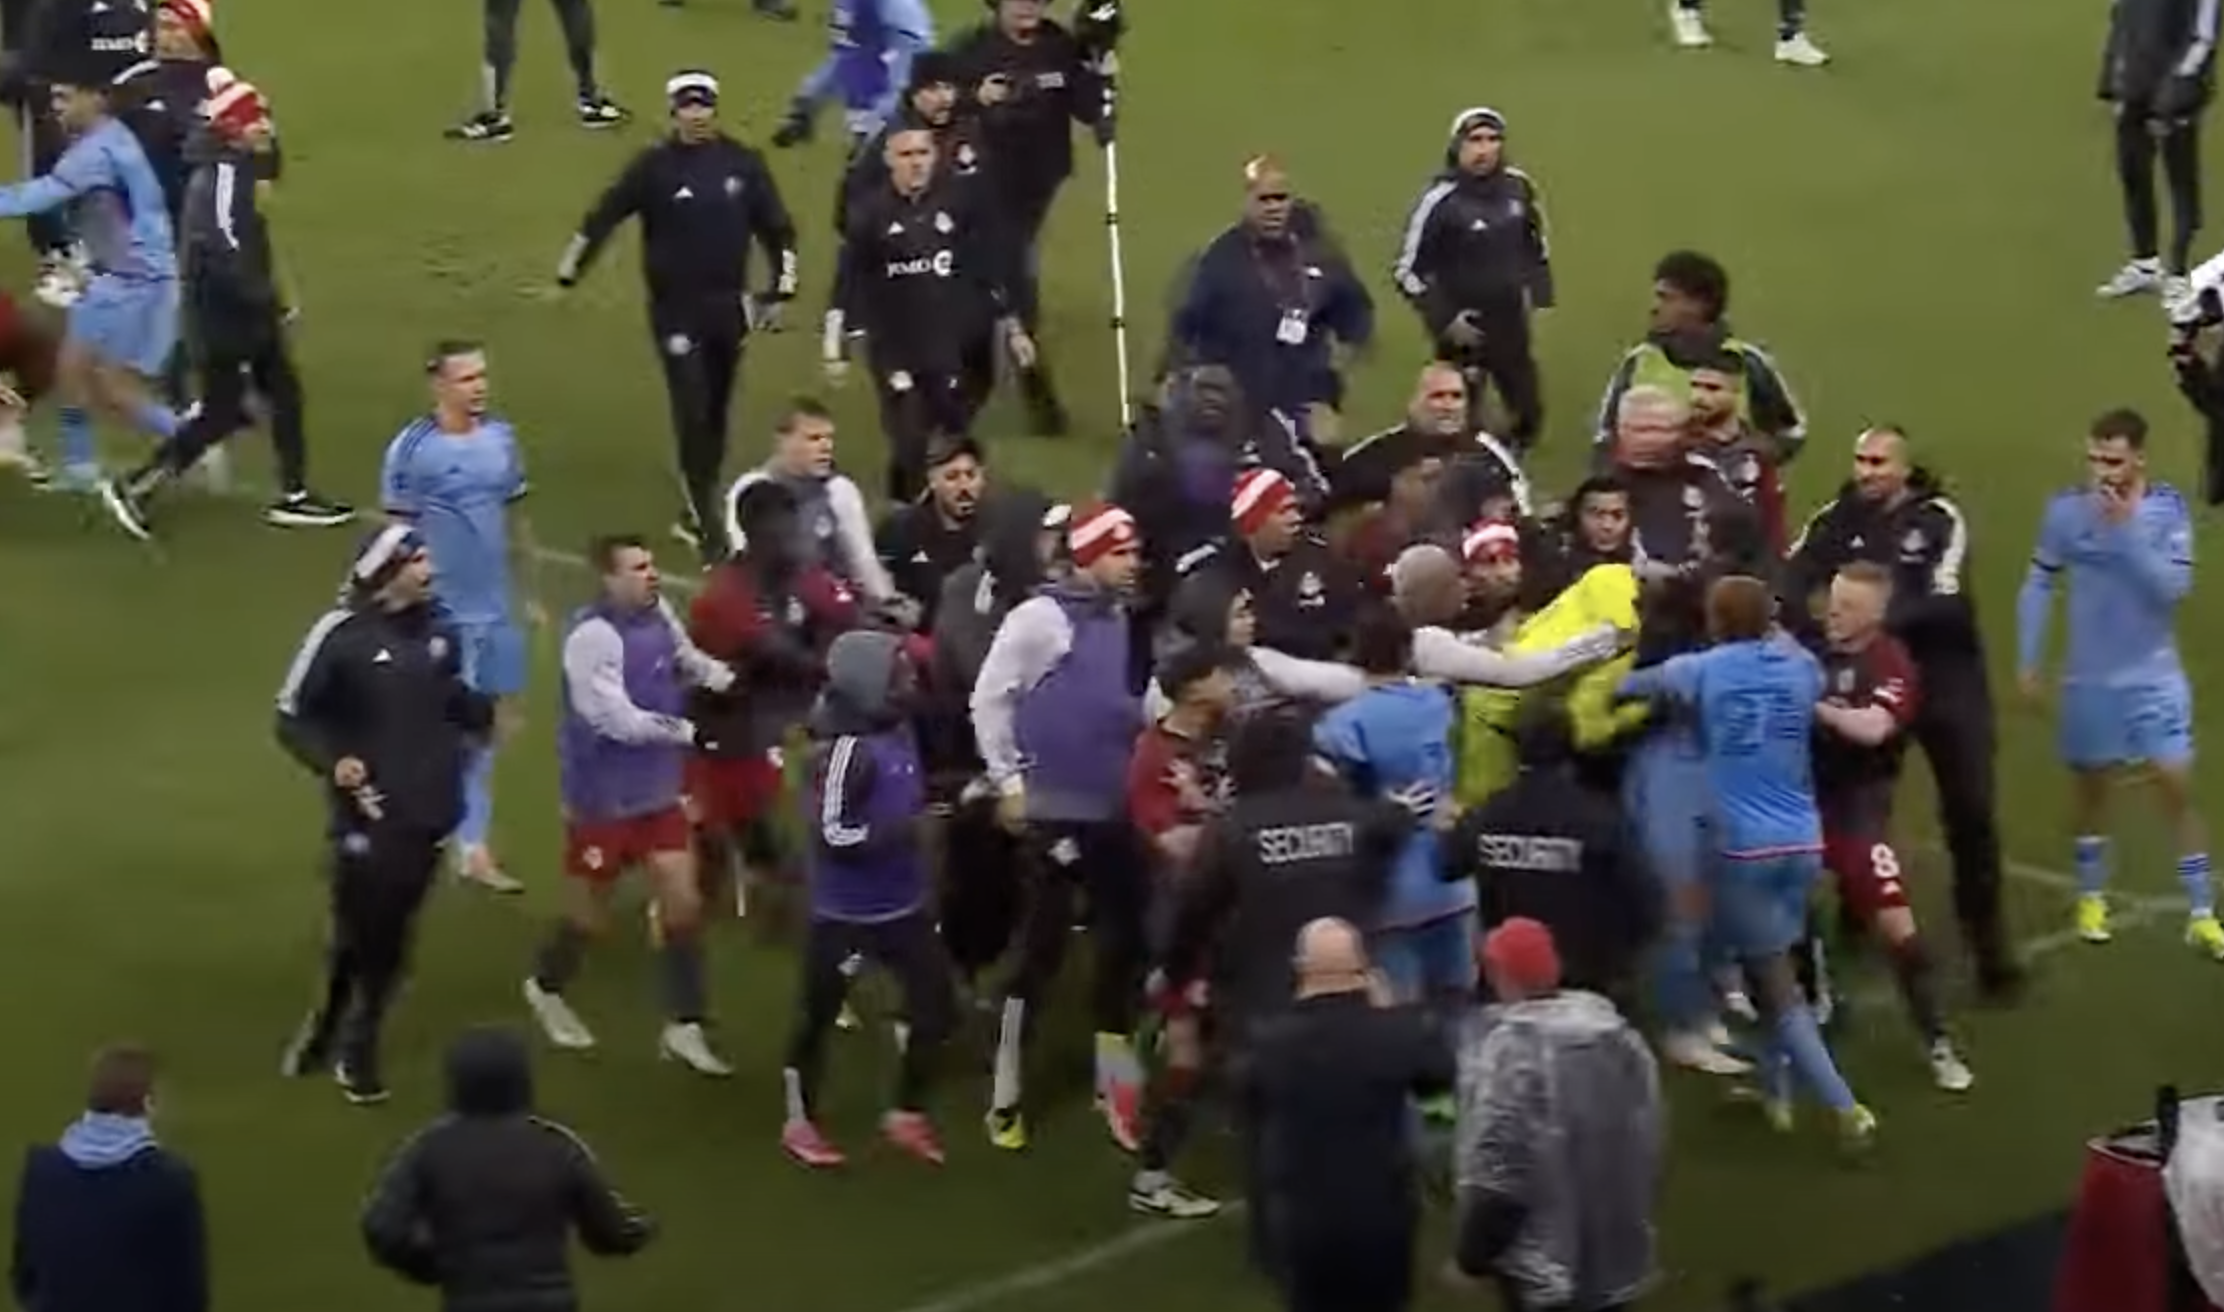 Toronto FC loss to NYCFC ends with violent brawl - Soccer America